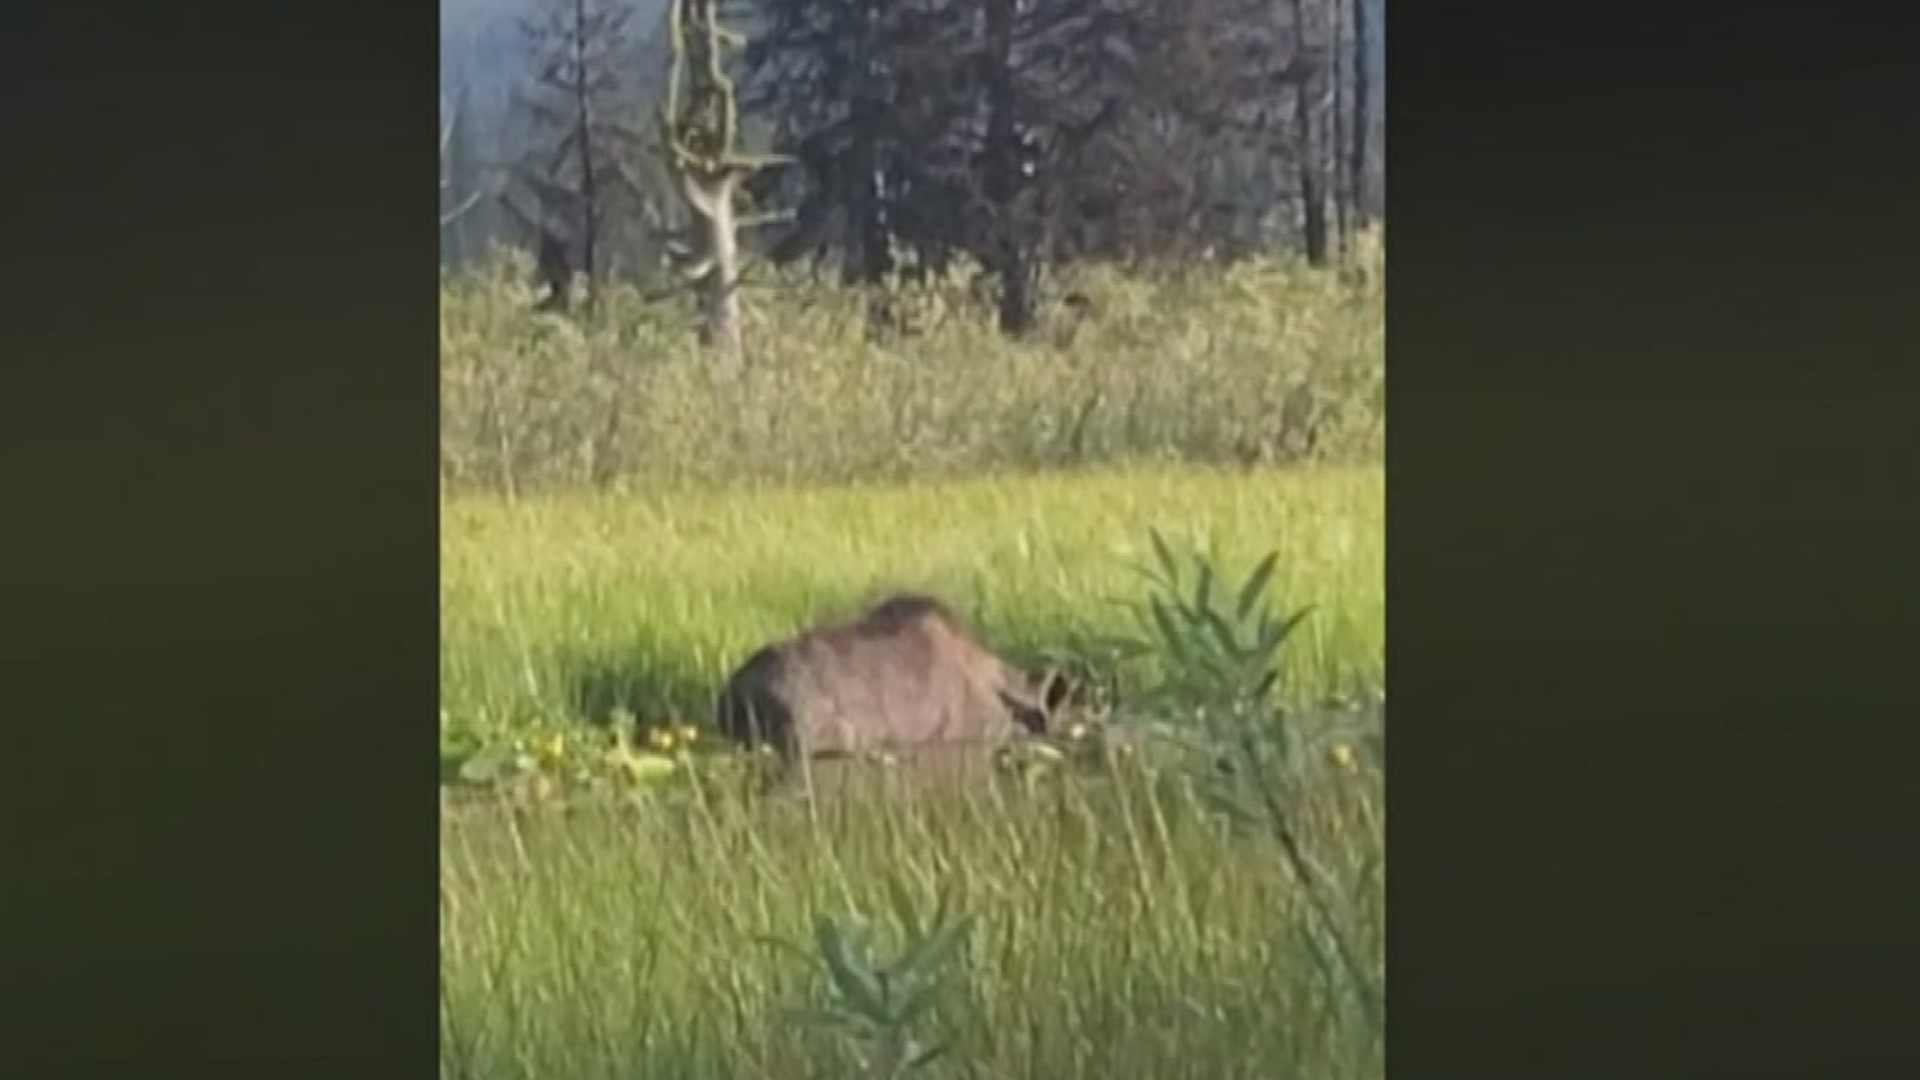 Wendy Magnuson was camping east of Cascade when she spotted a moose enjoying the tall summer grass.